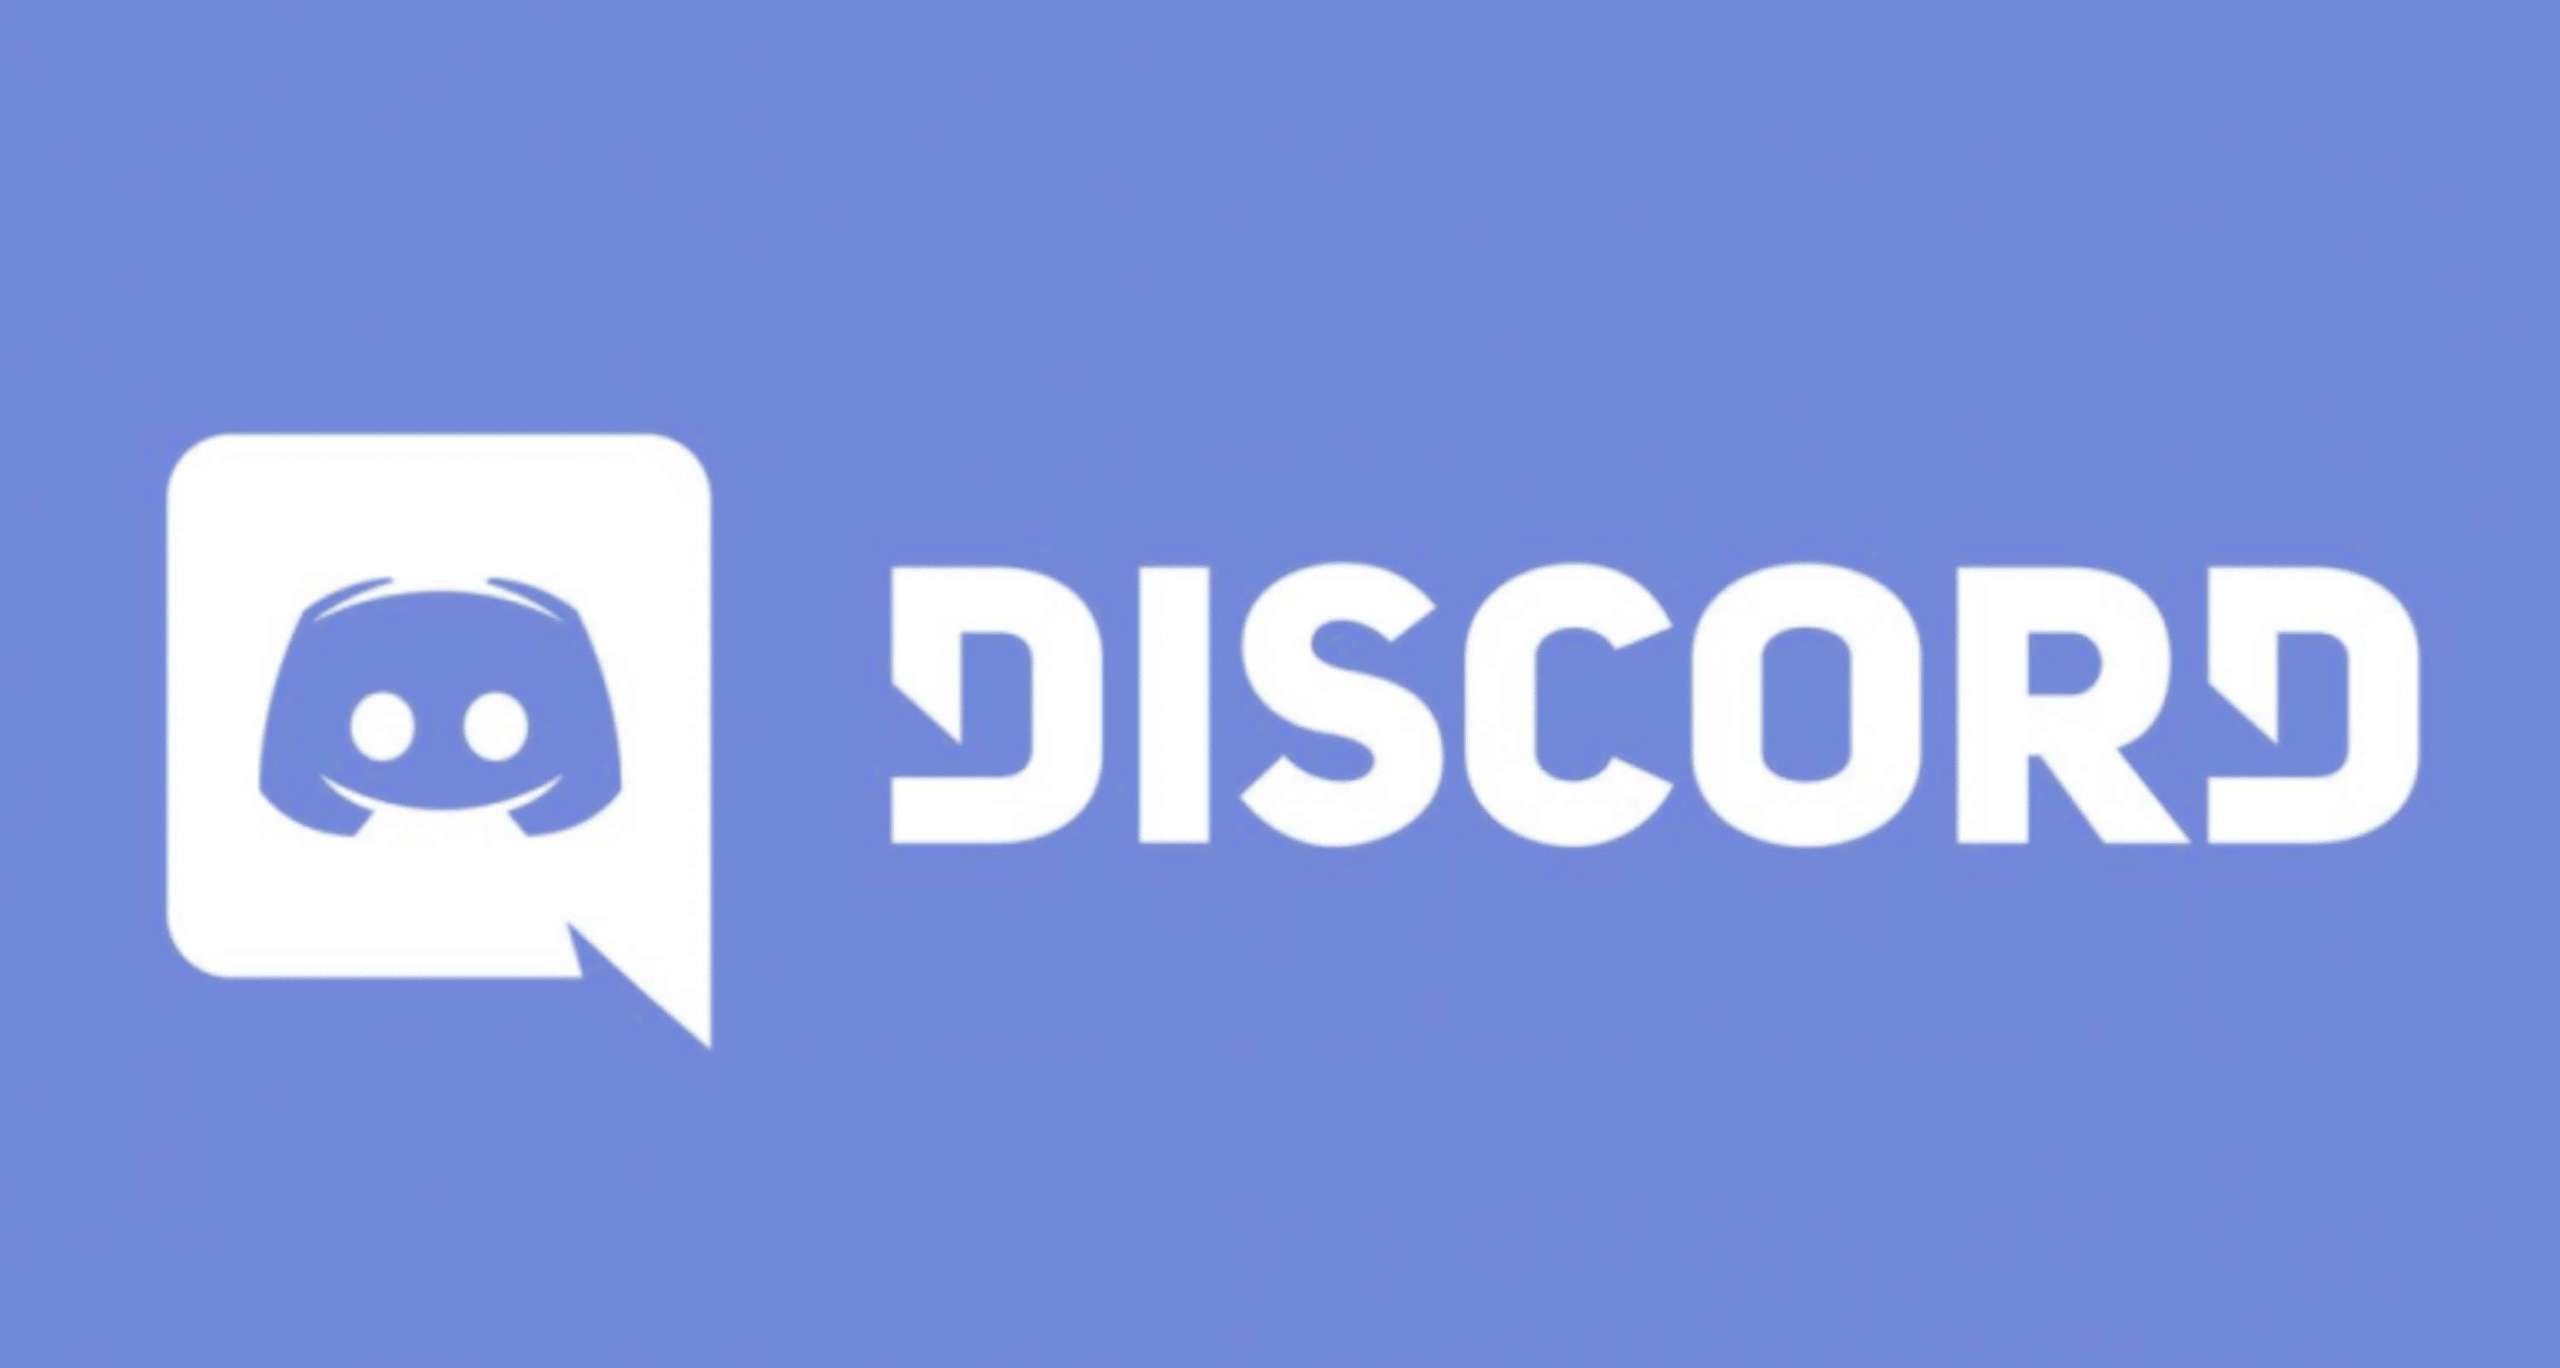 After The Massive Cleanup Of Bots, Discord Has Decided To Reinstate YouTube